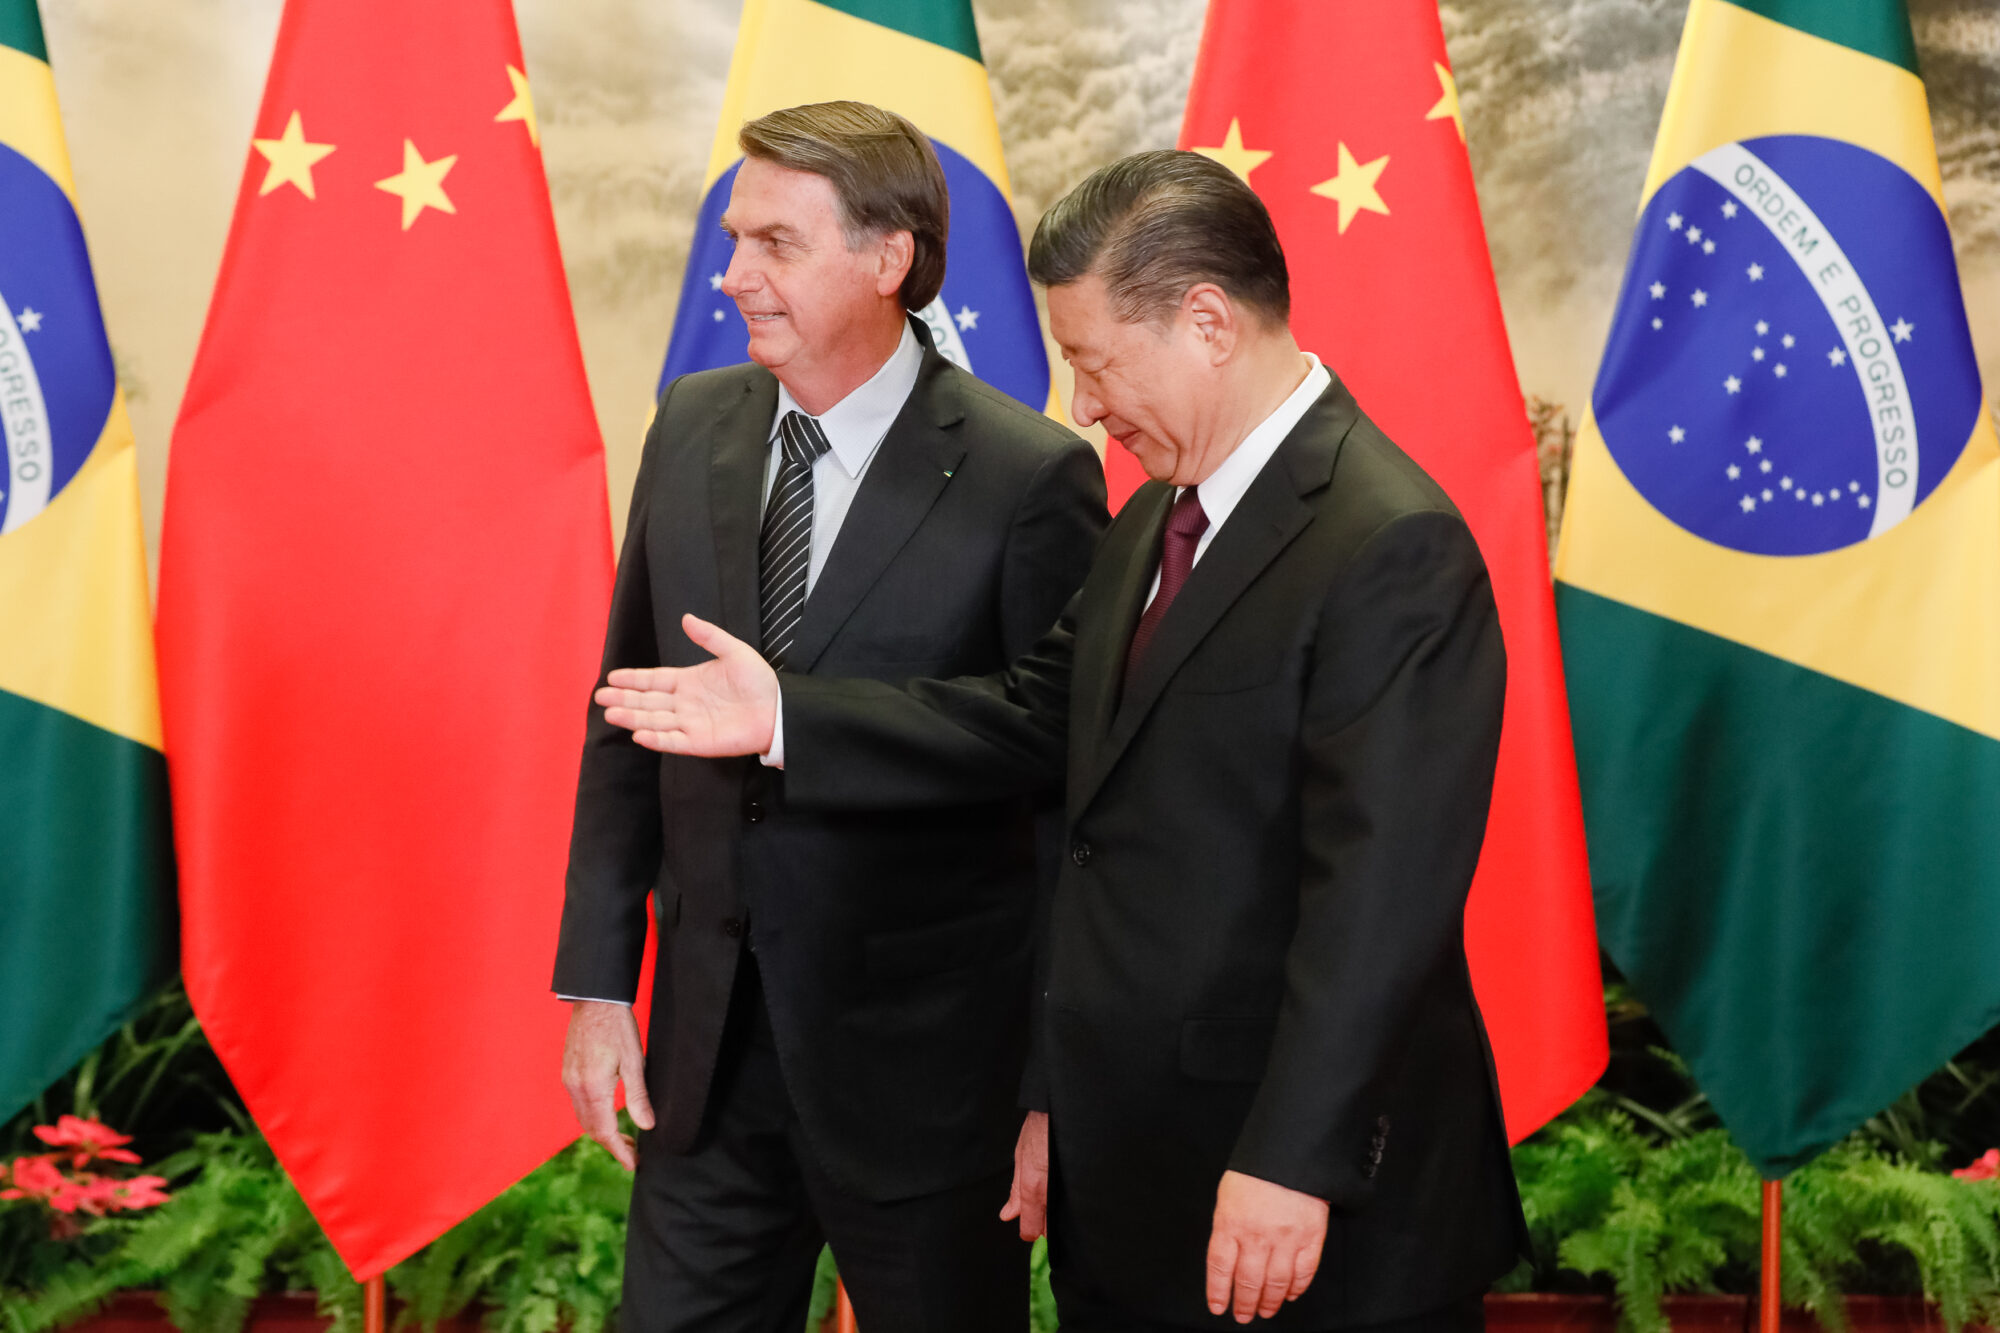 Jair Bolsonaro and Xi Jinping in front of Chinese and Brazilian flags